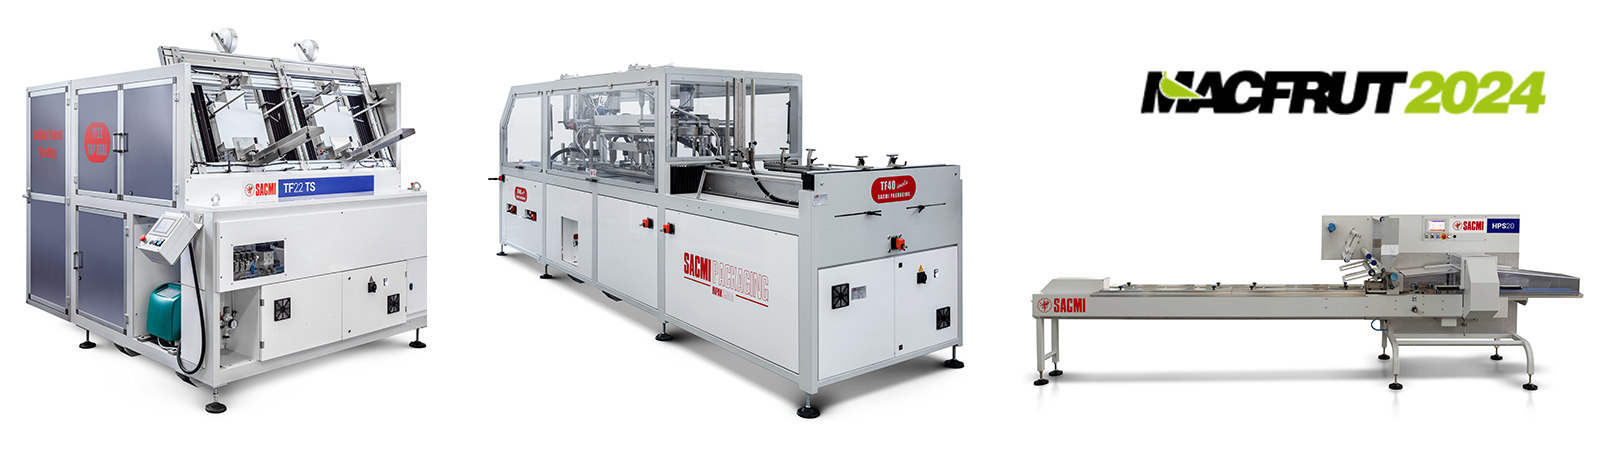 SACMI Packaging & Chocolate presents the new version of the popular TF40 IMOLA tray forming machine at Macfrut 2024